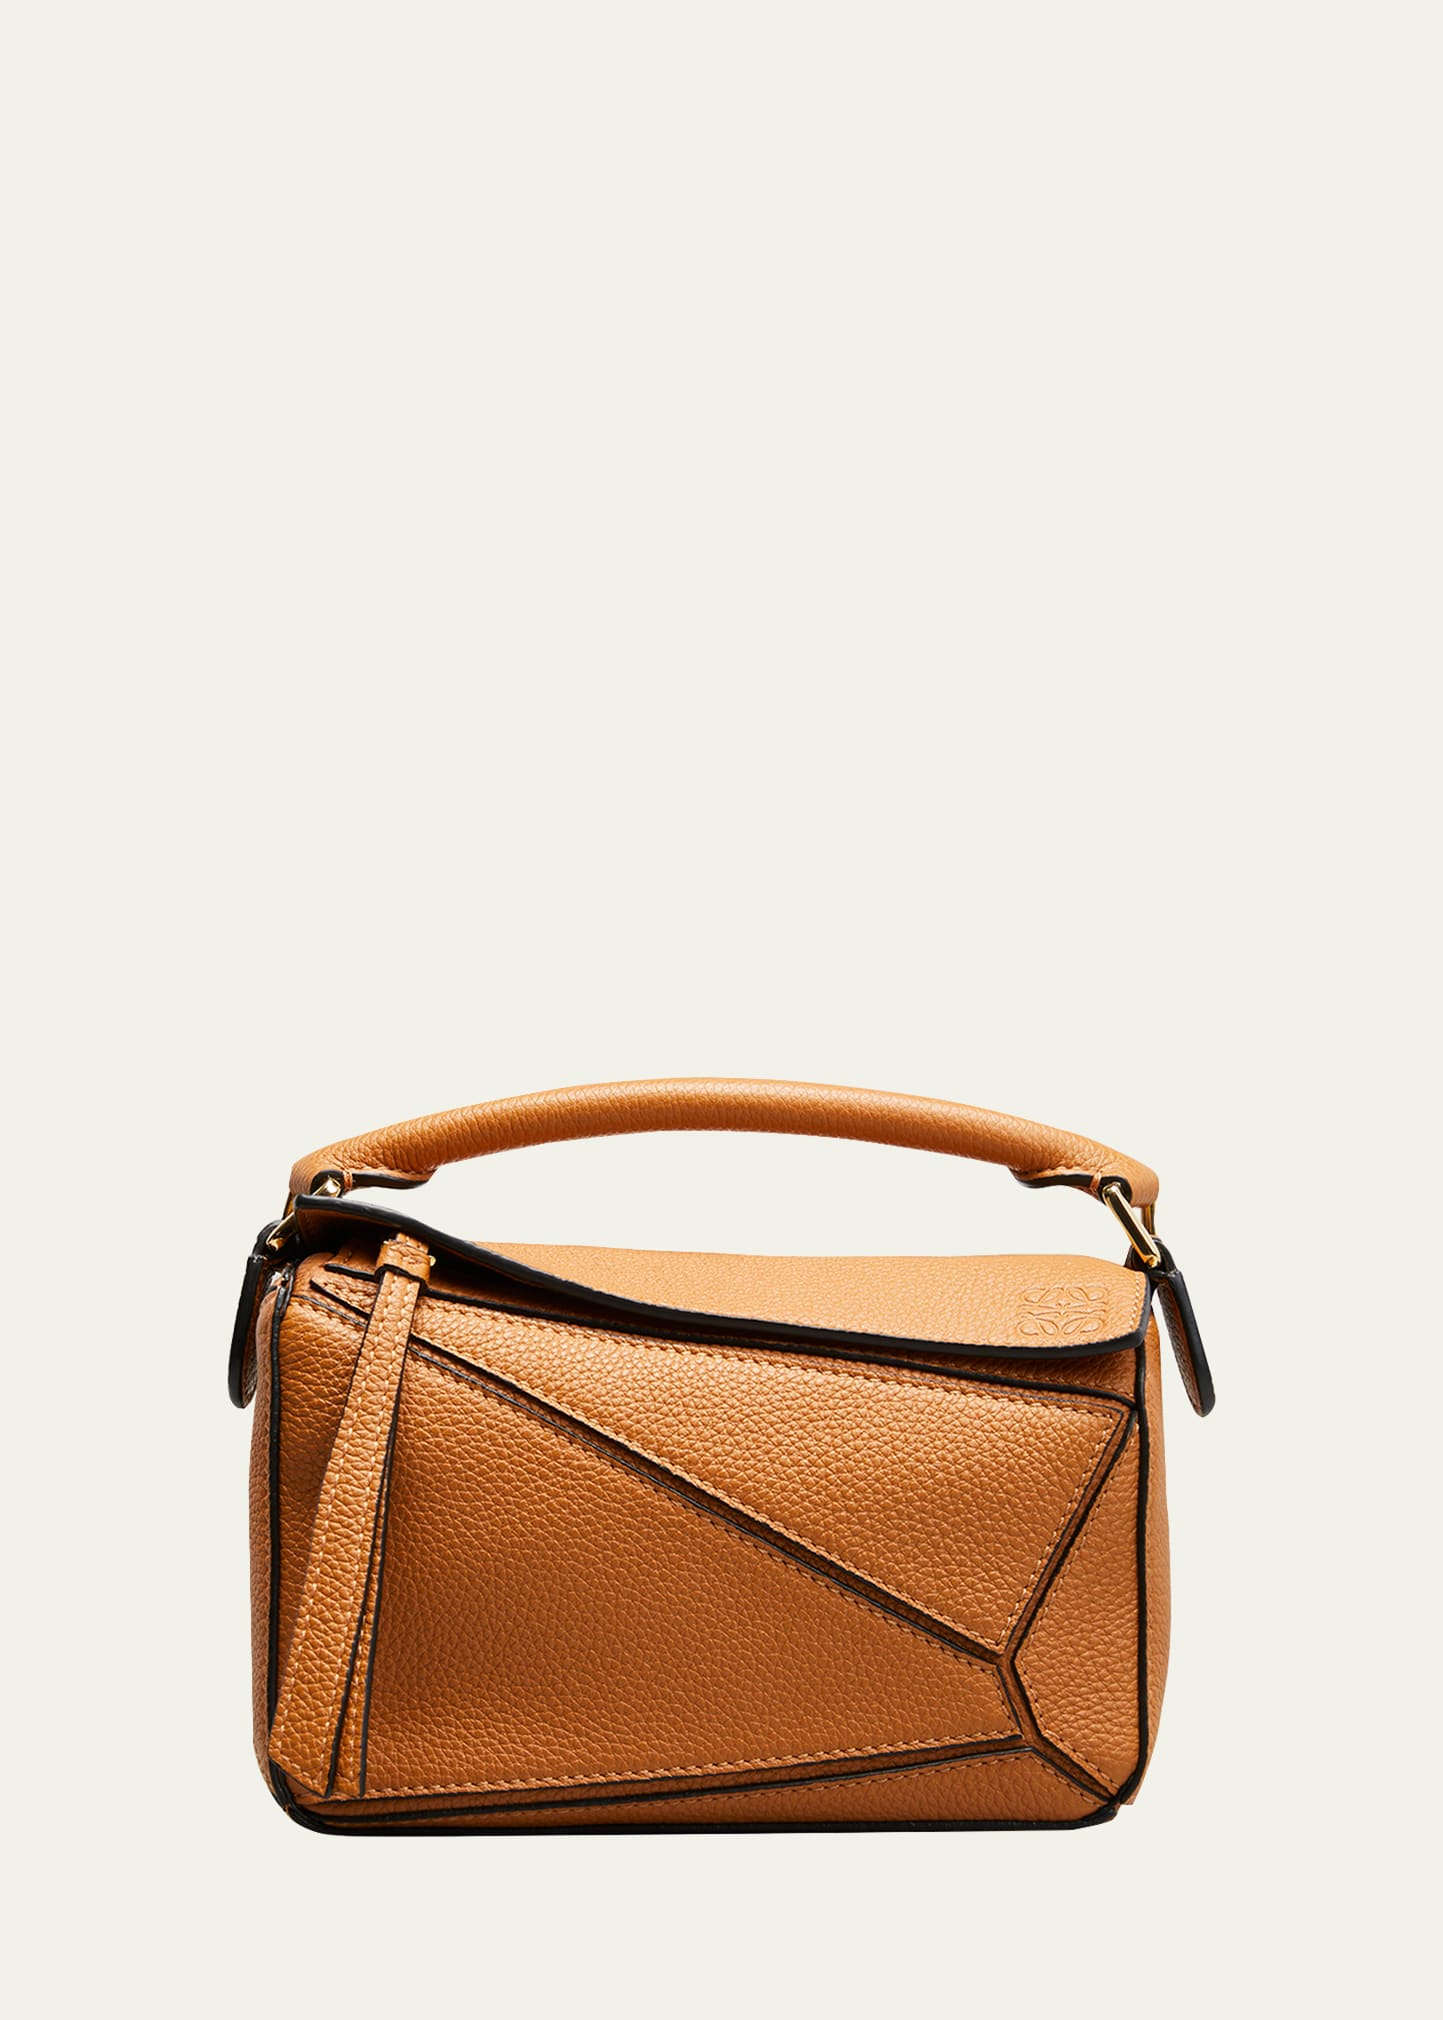 Loewe Puzzle Mini Top-handle Bag In Grained Leather In Caramel